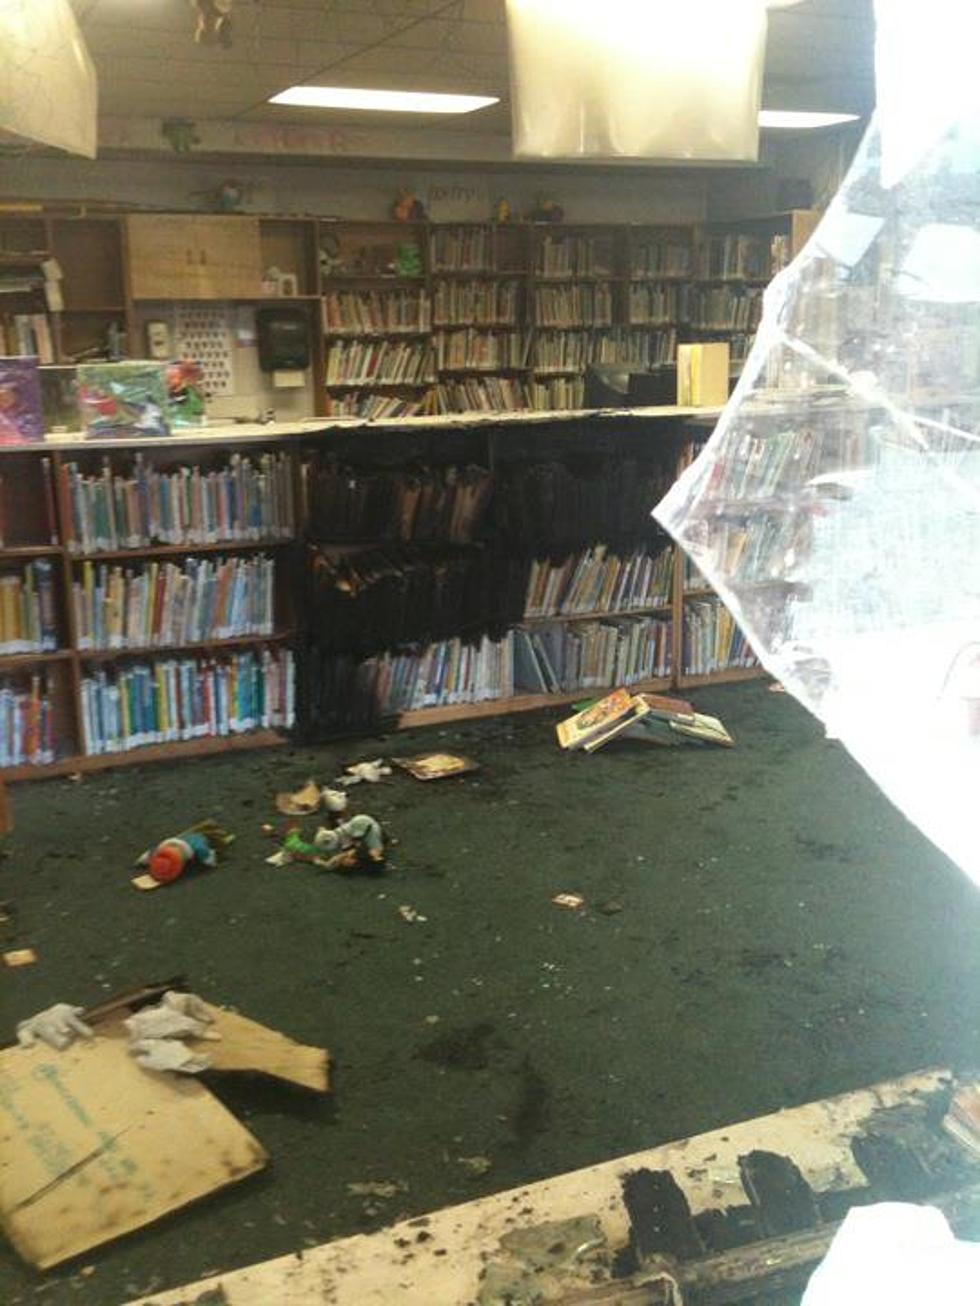 Robertson Elementary School Library Caught Fire Due To Arson